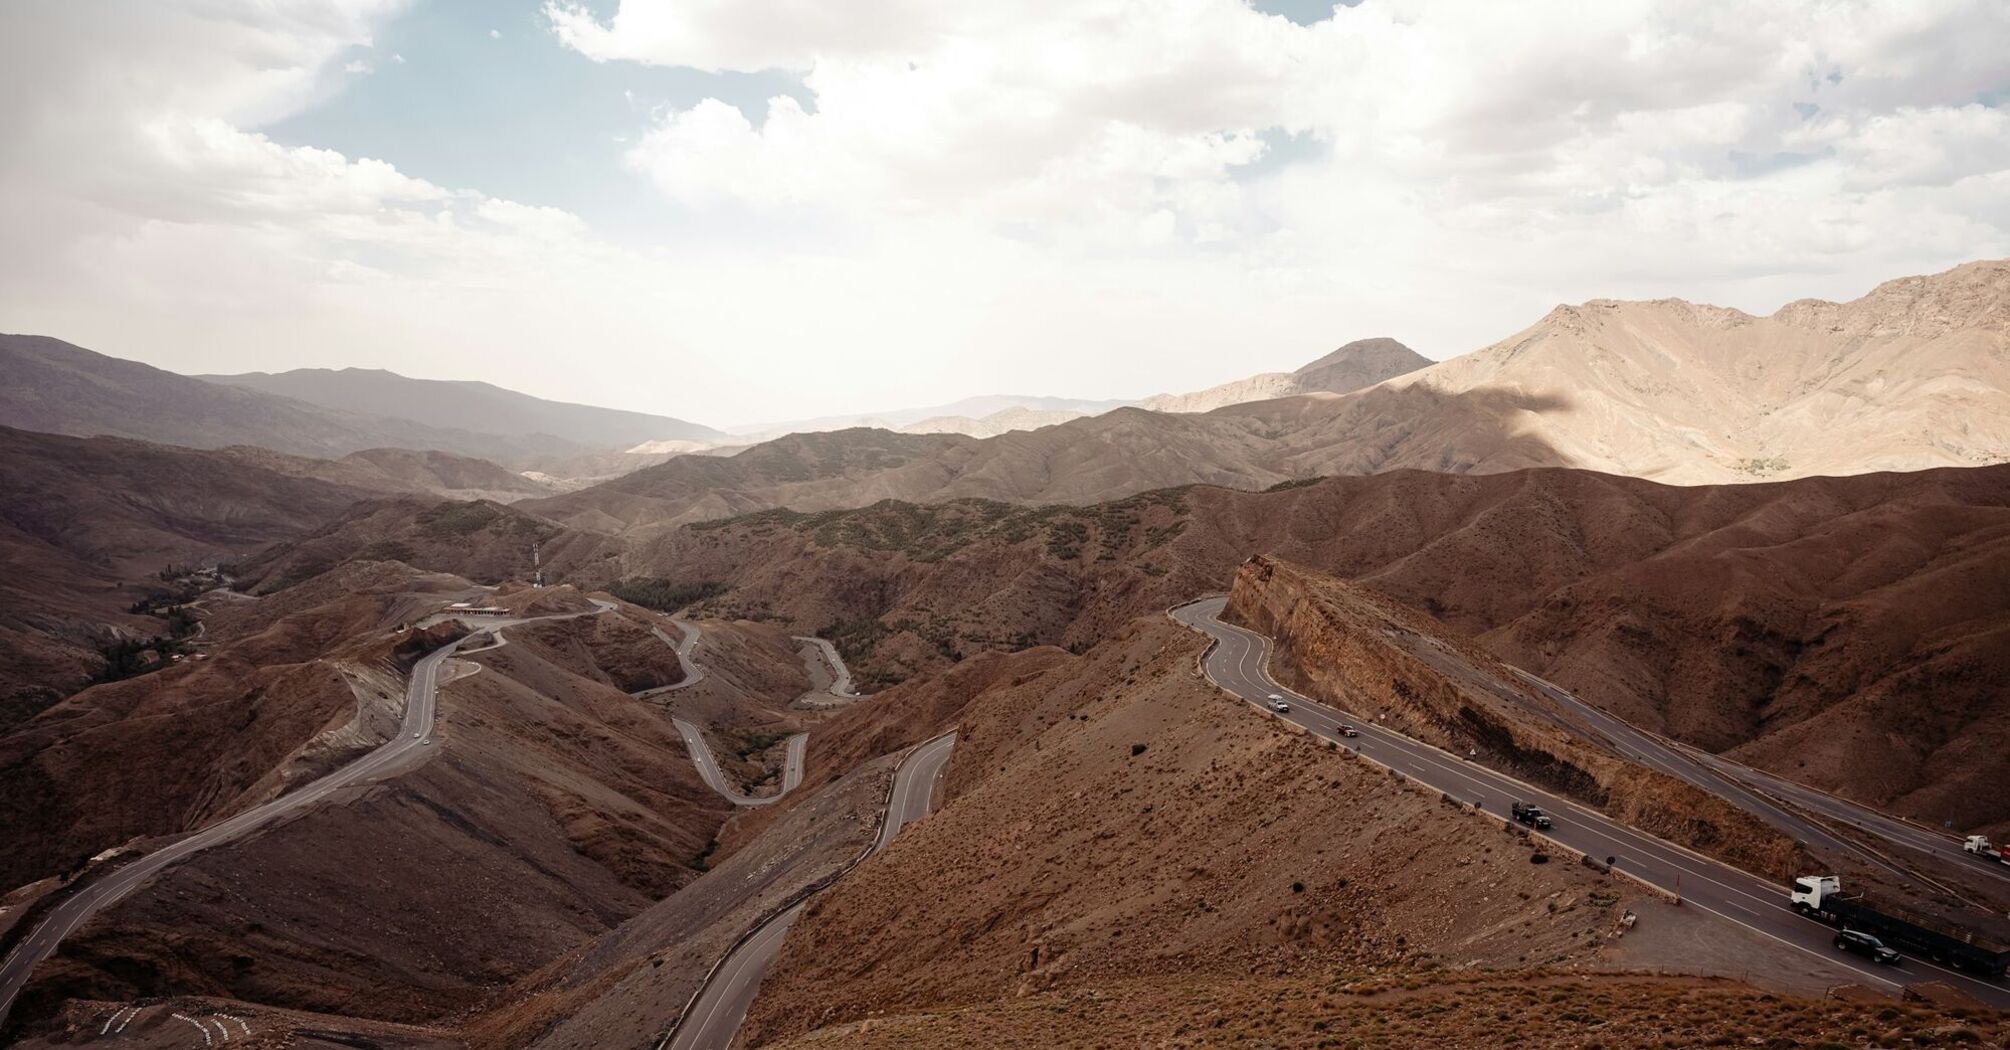 Winding roads meandering through the arid mountainous landscape of Morocco